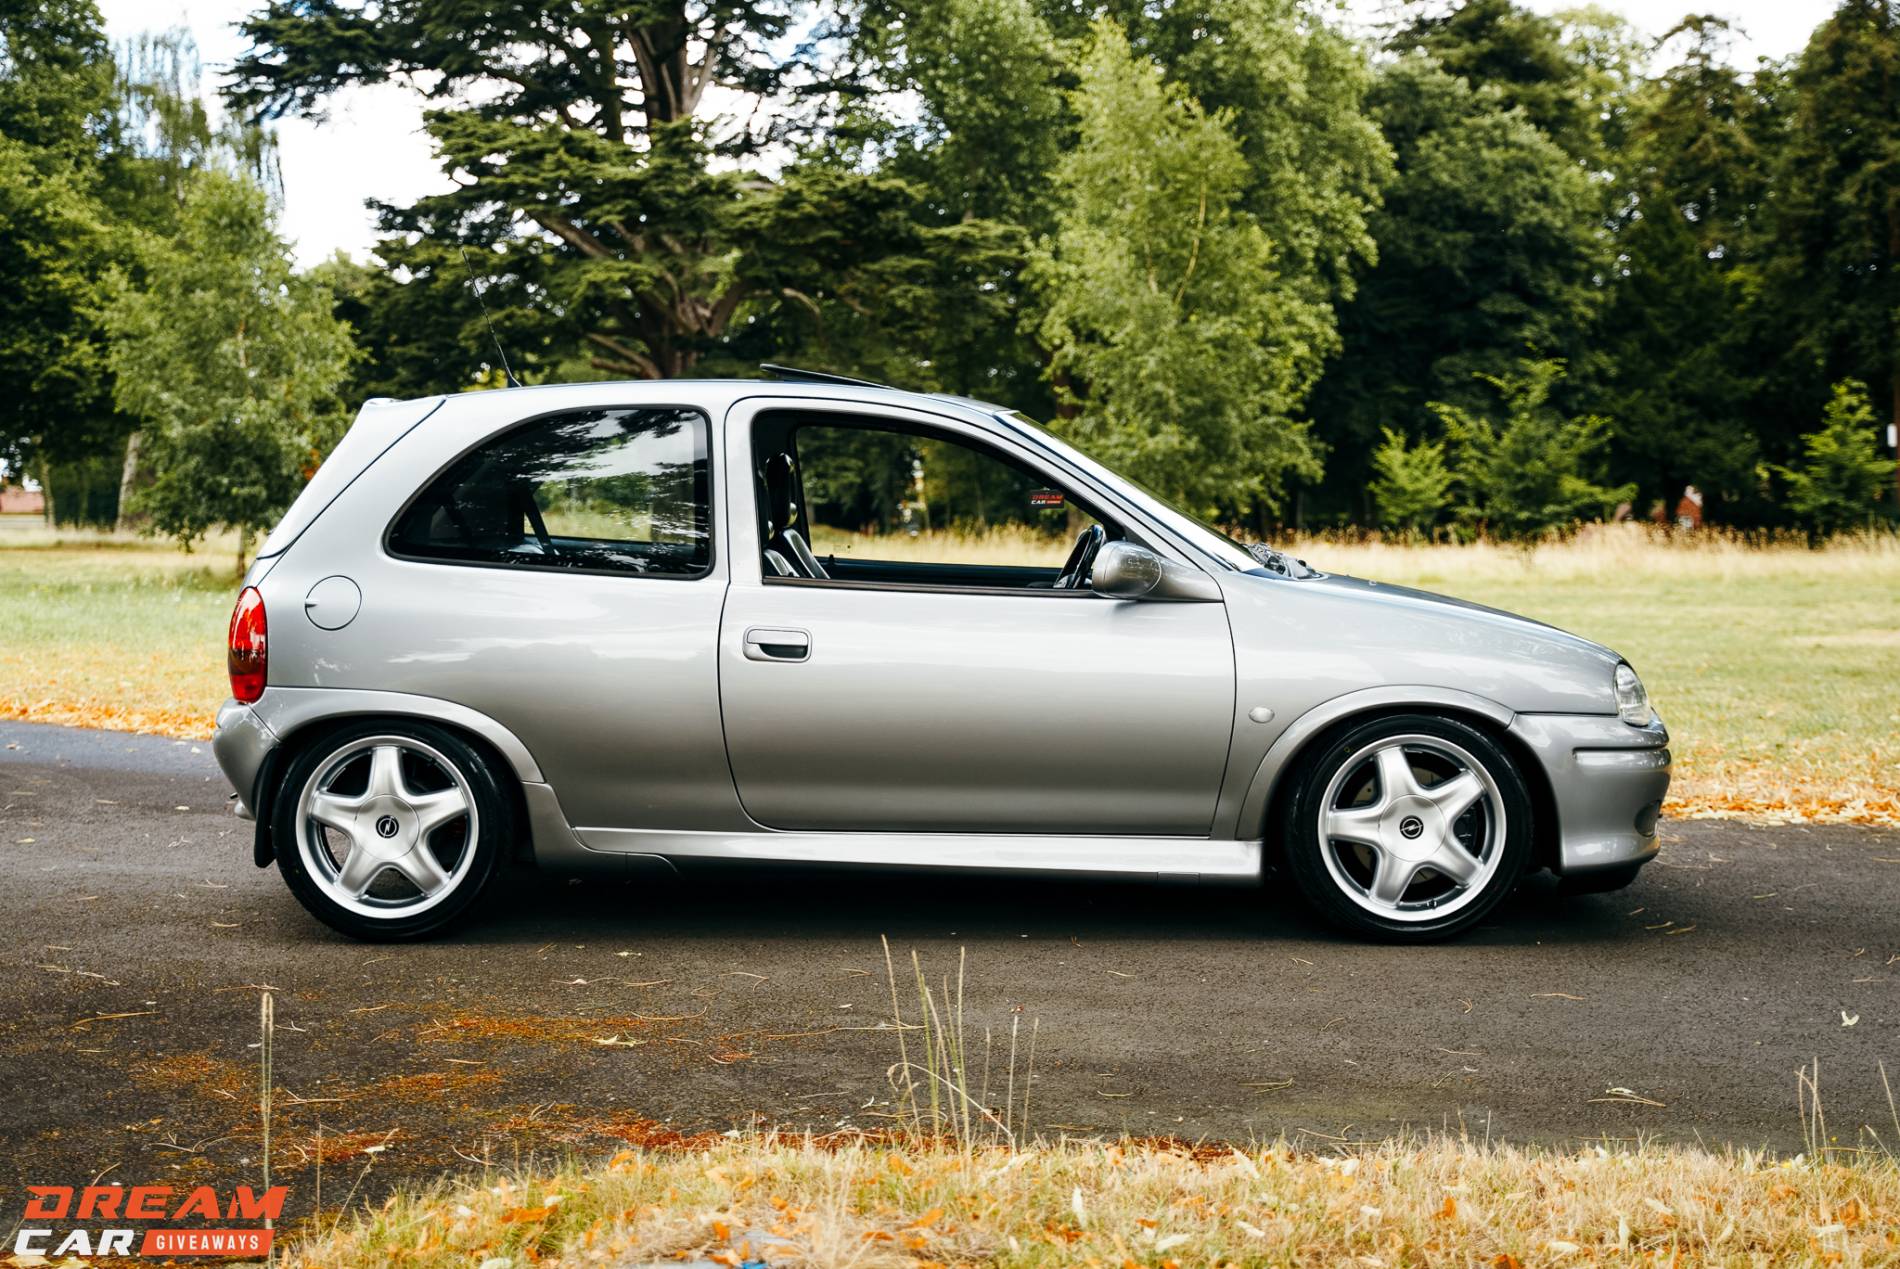 300HP Corsa GSI C20LET - Only 899 Entries